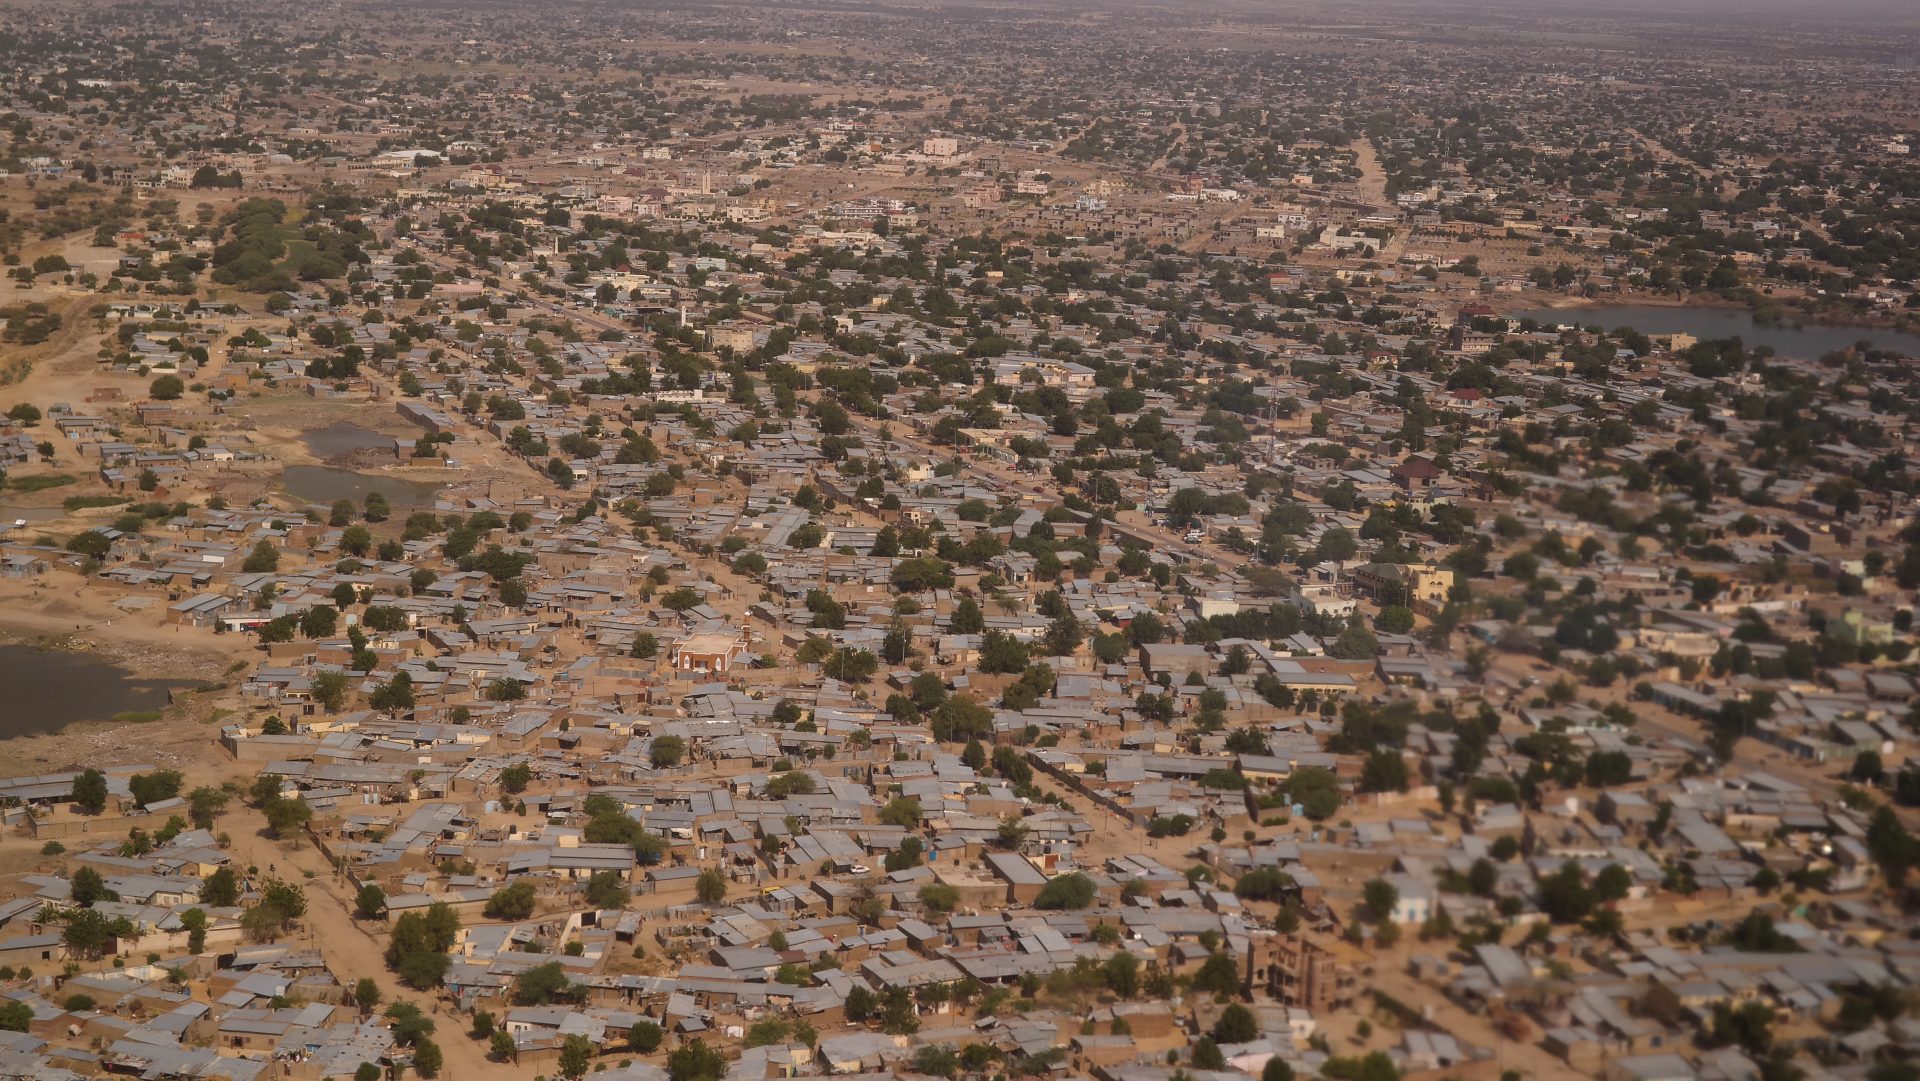 Aerial view of dry landscape with settlements and sparse vegetation.